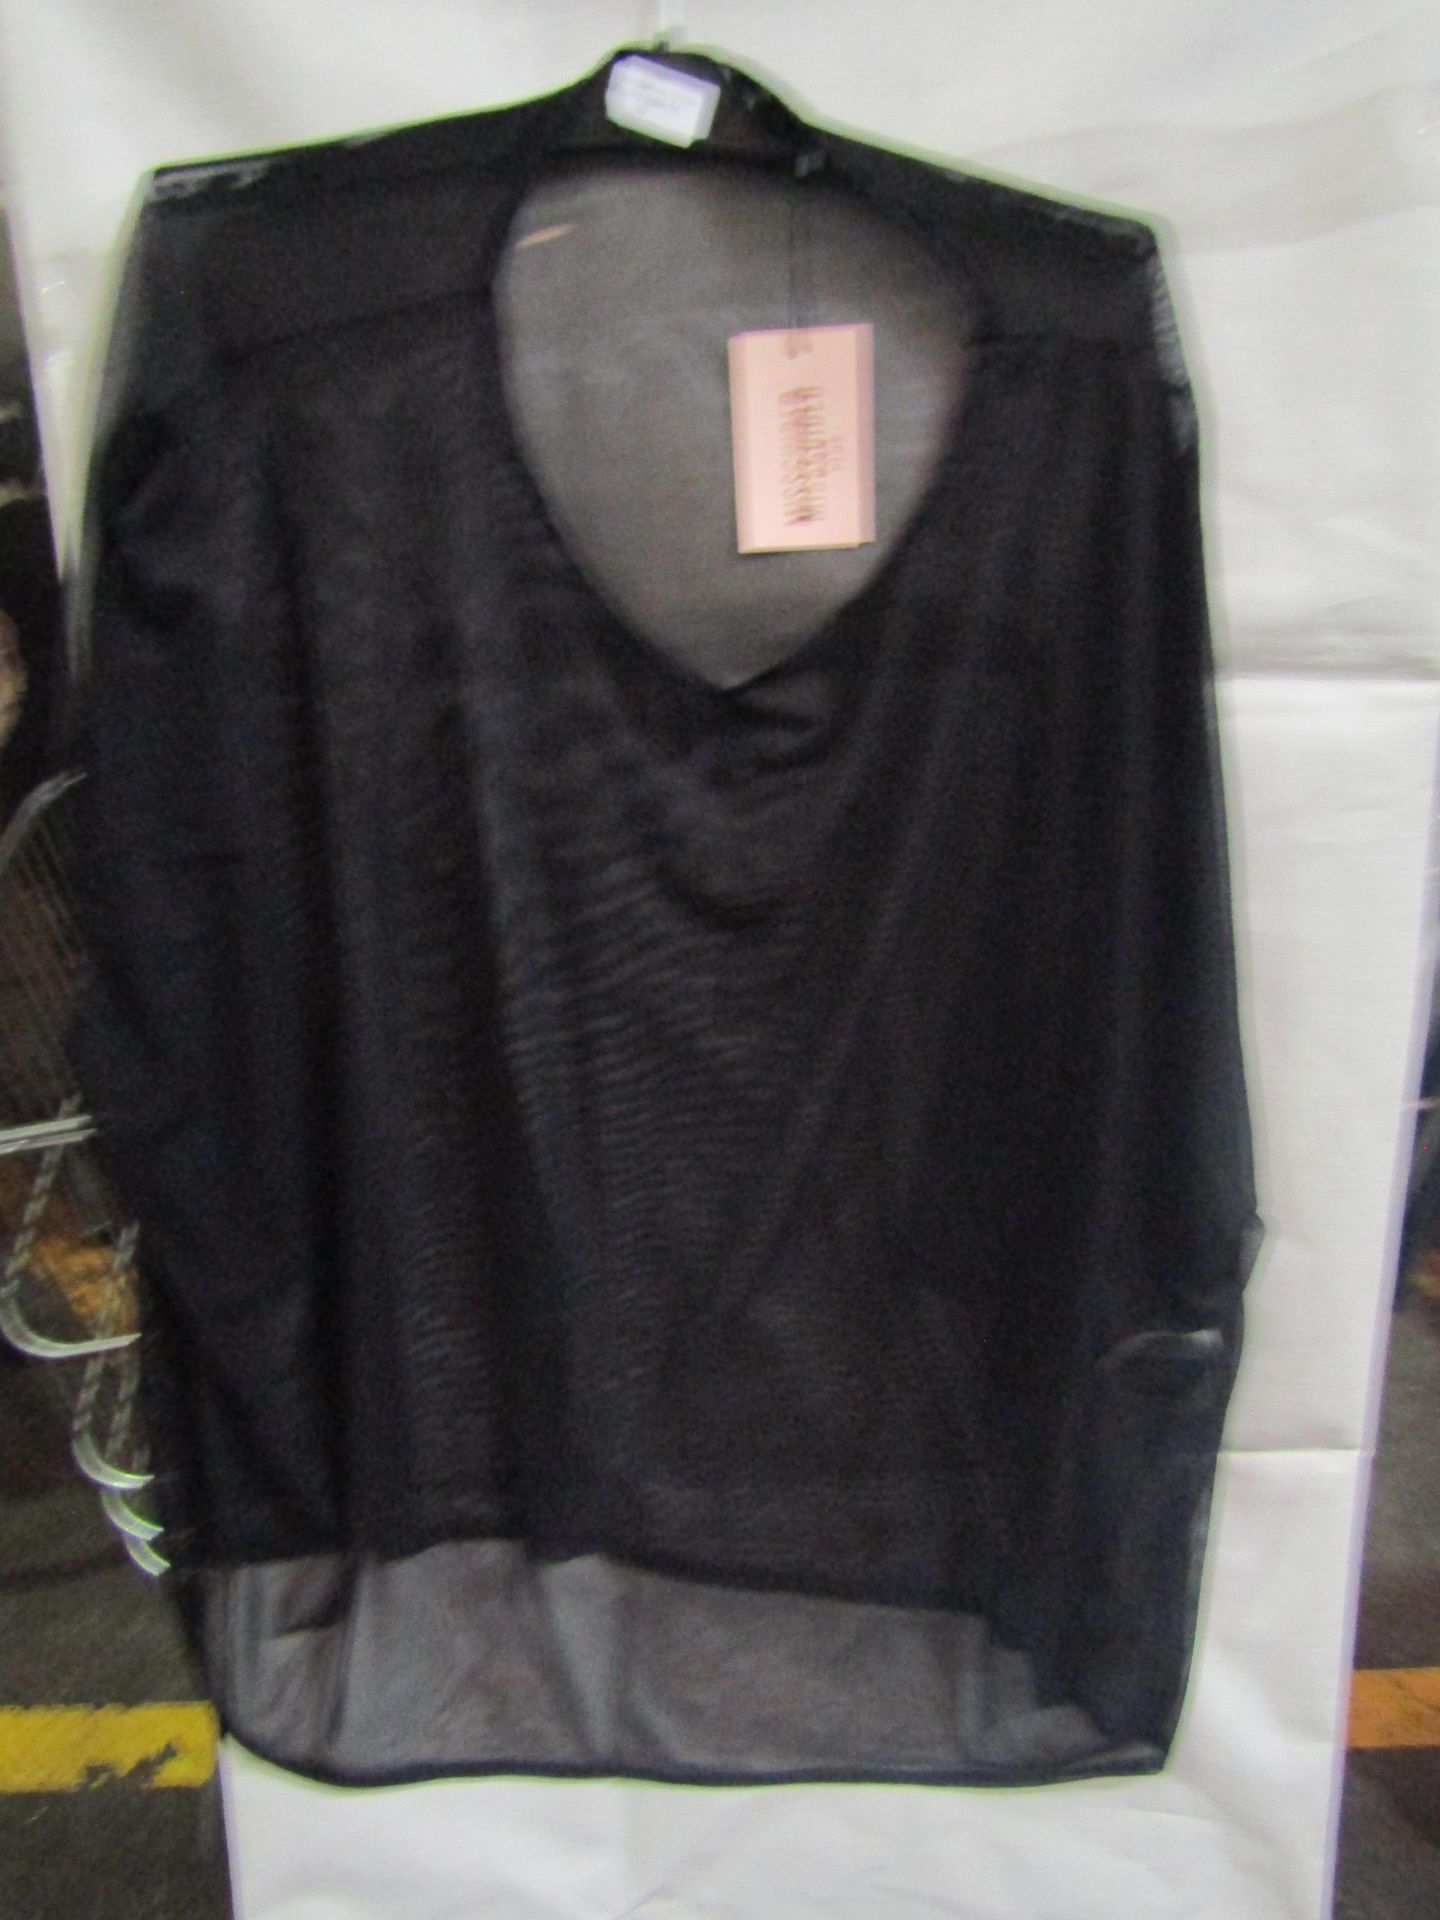 2x Missguided Plus Mesh Oversized T-Shirt - Size 24, New & Packaged.